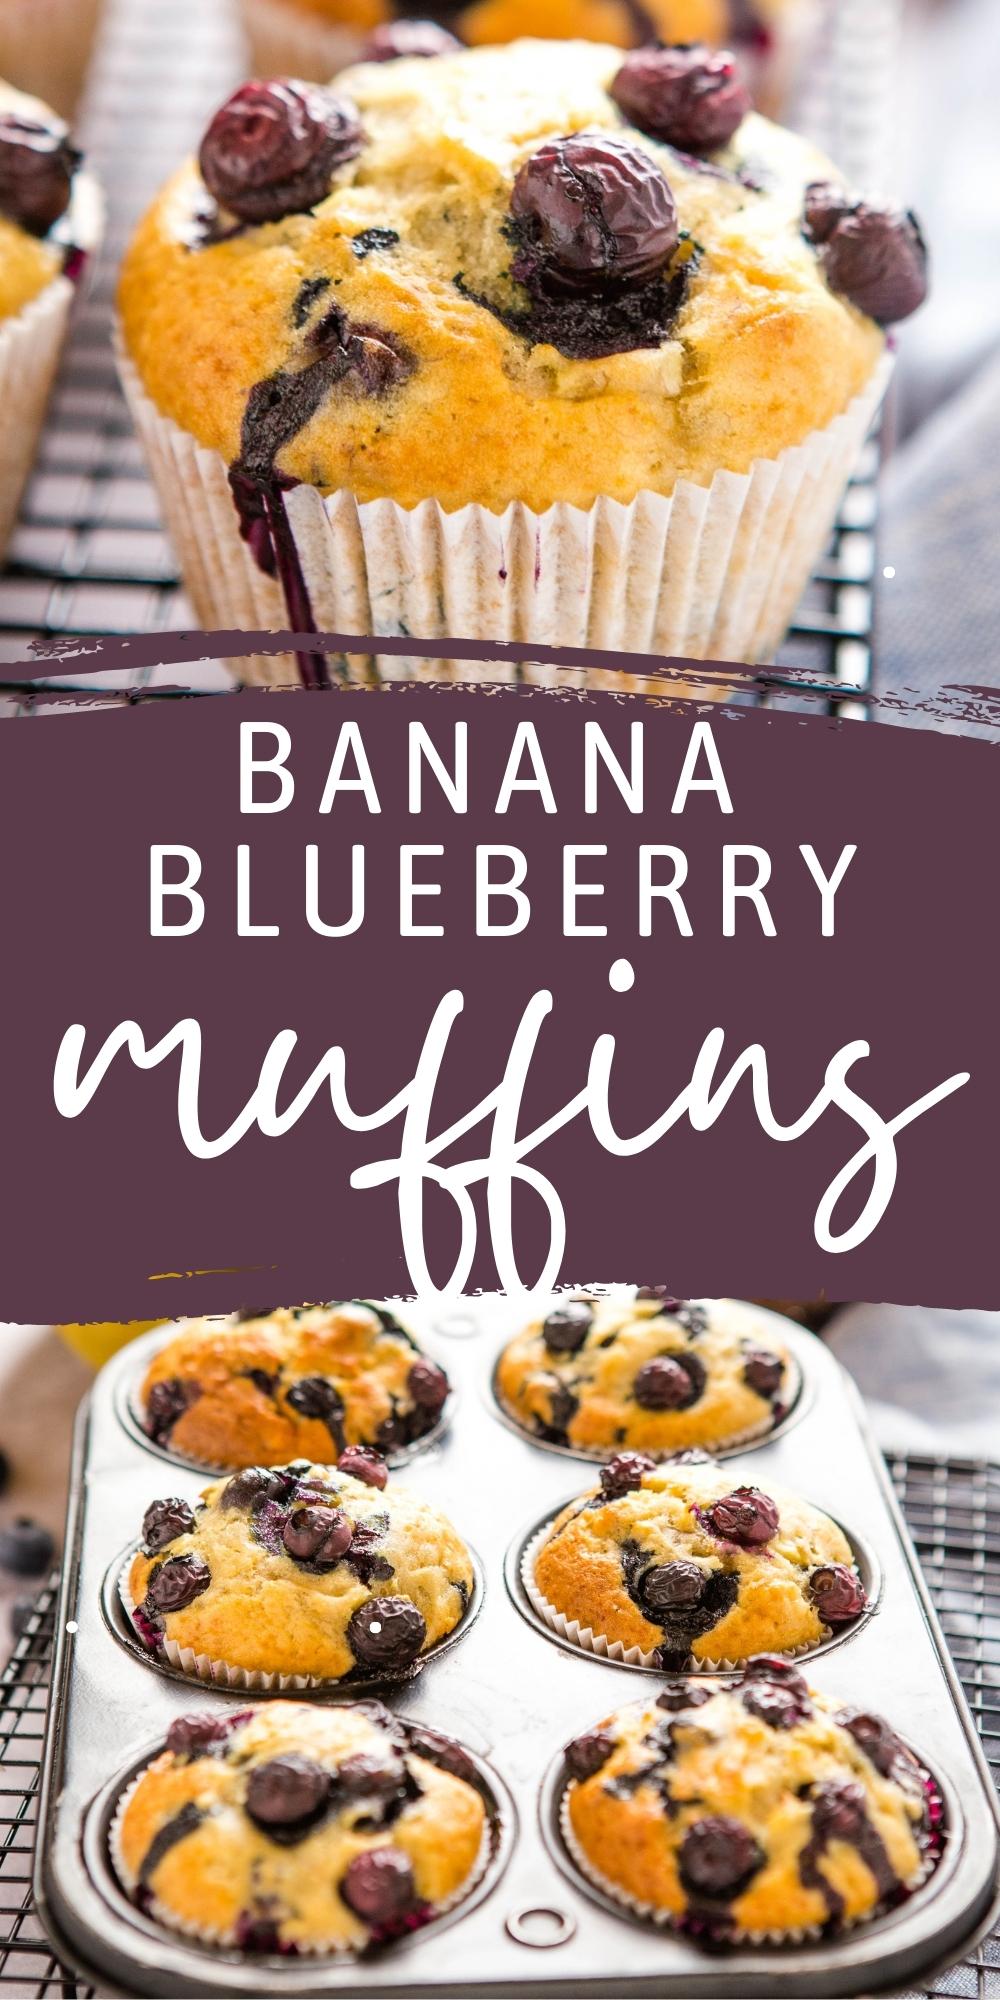 These Banana Blueberry Muffins are the perfect sweet treat for breakfast or brunch. Make this recipe for moist, tender muffins sweetened with banana and packed with fresh, juicy blueberries! Recipe from thebusybaker.ca! #bananablueberrymuffins #banana #blueberry #muffins #baking #homemademuffins #bananamuffins #blueberrymuffins via @busybakerblog